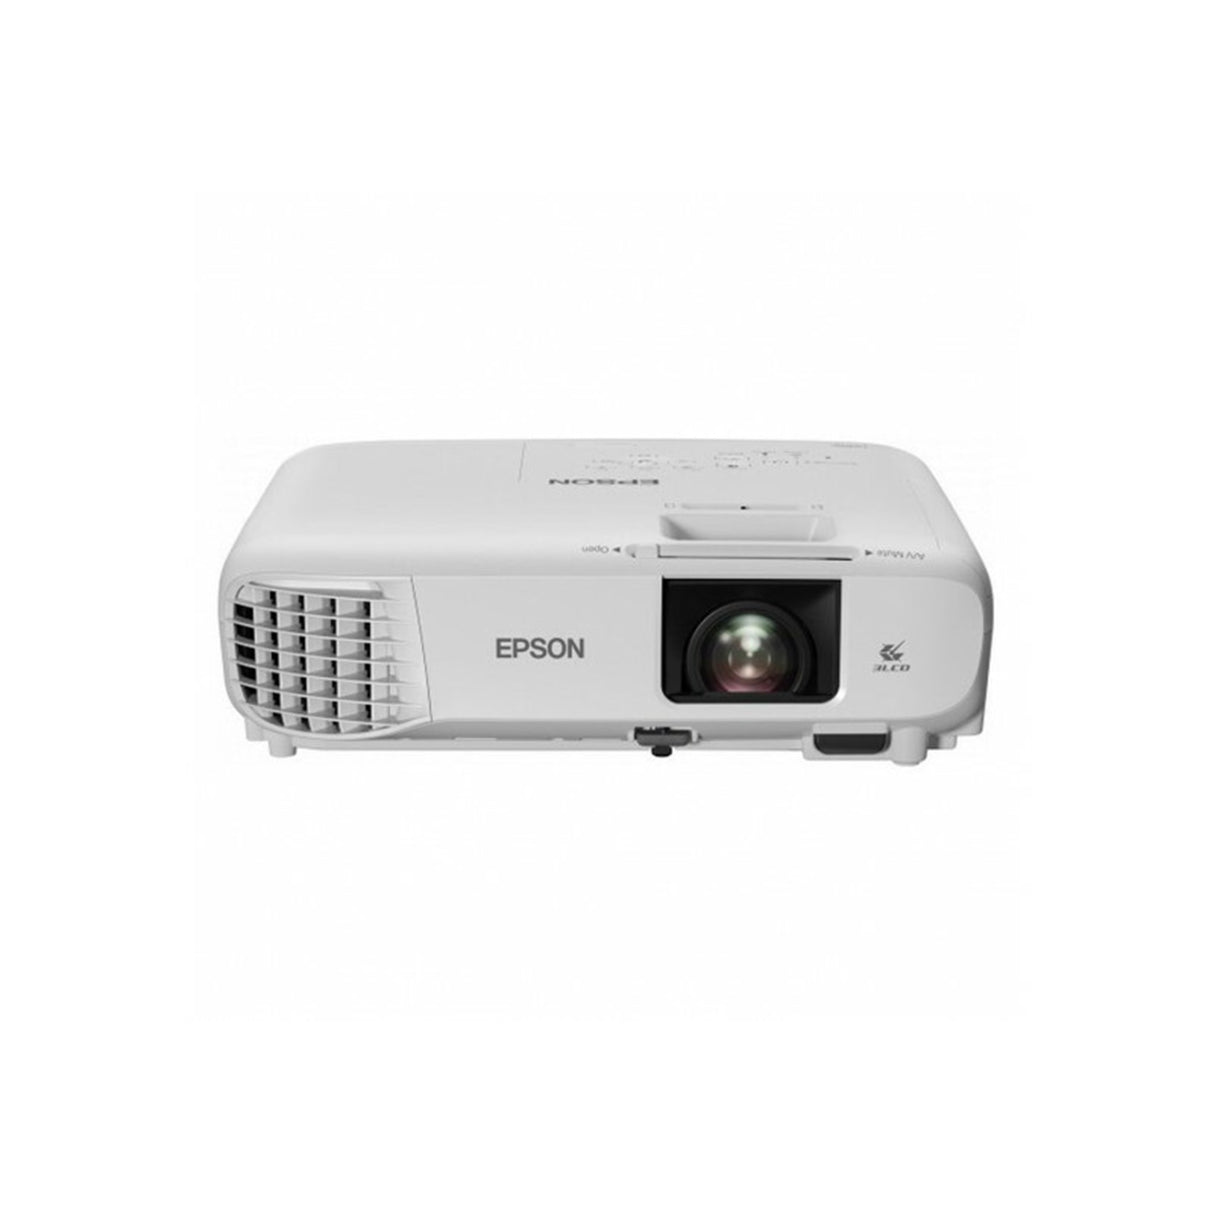 Epson EH-TW740 - 3LCD Projector 1080p Full HD 3300 Lumens